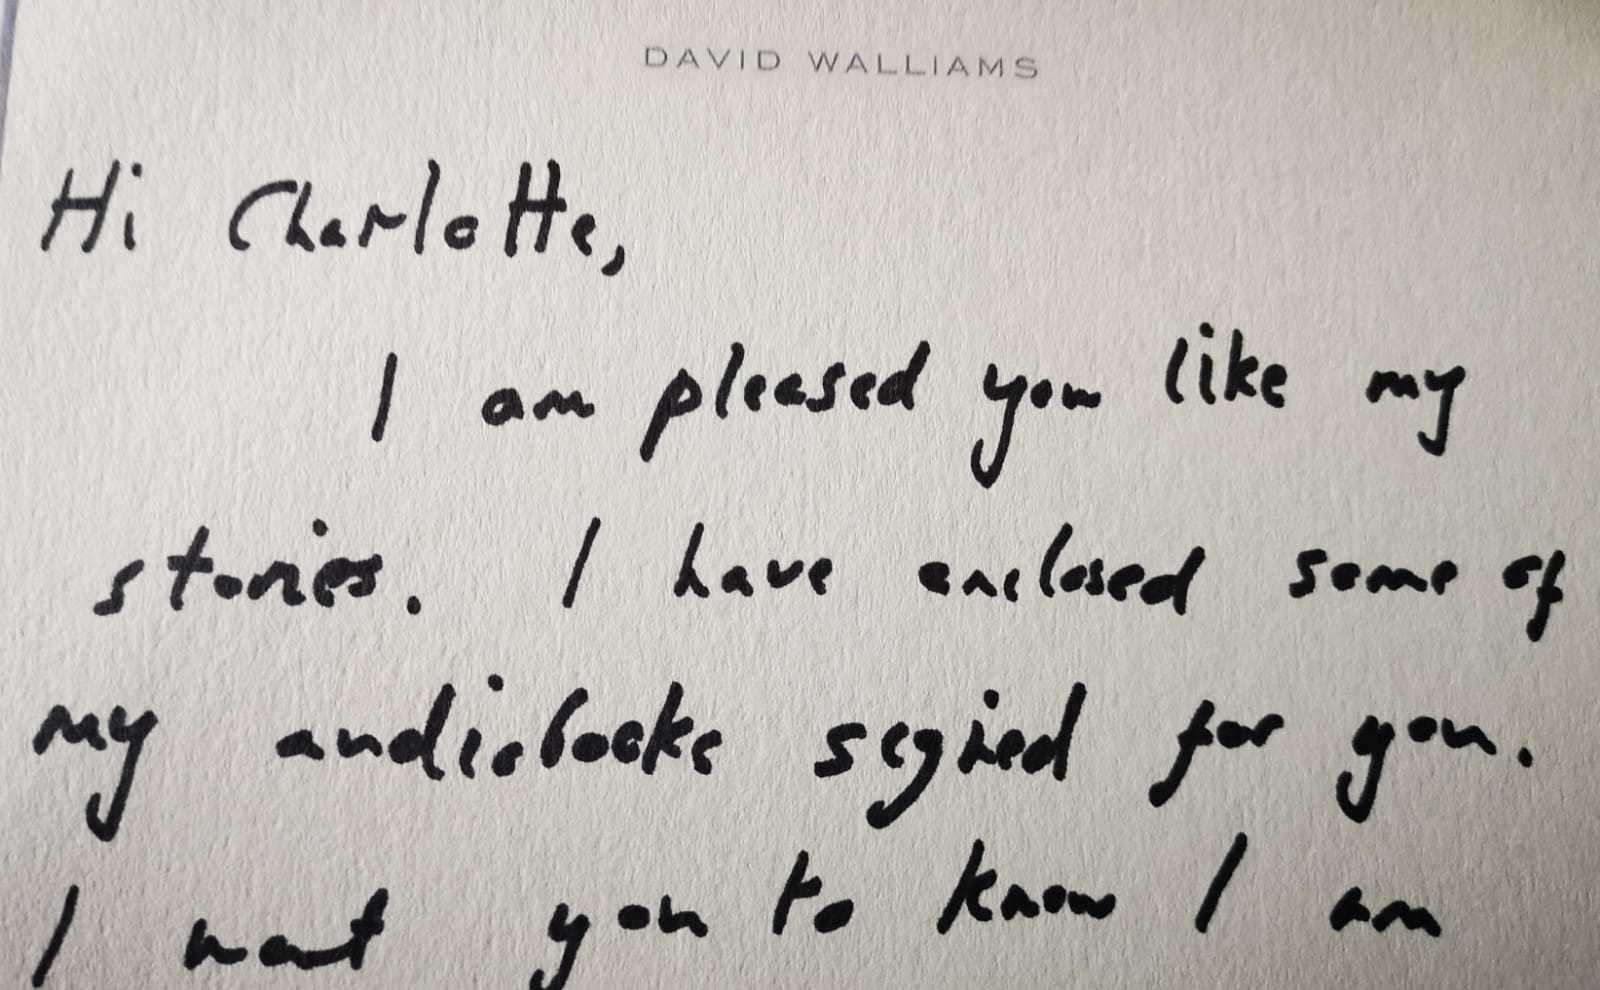 The audio books came with a personalised note from David Walliams to Charlotte